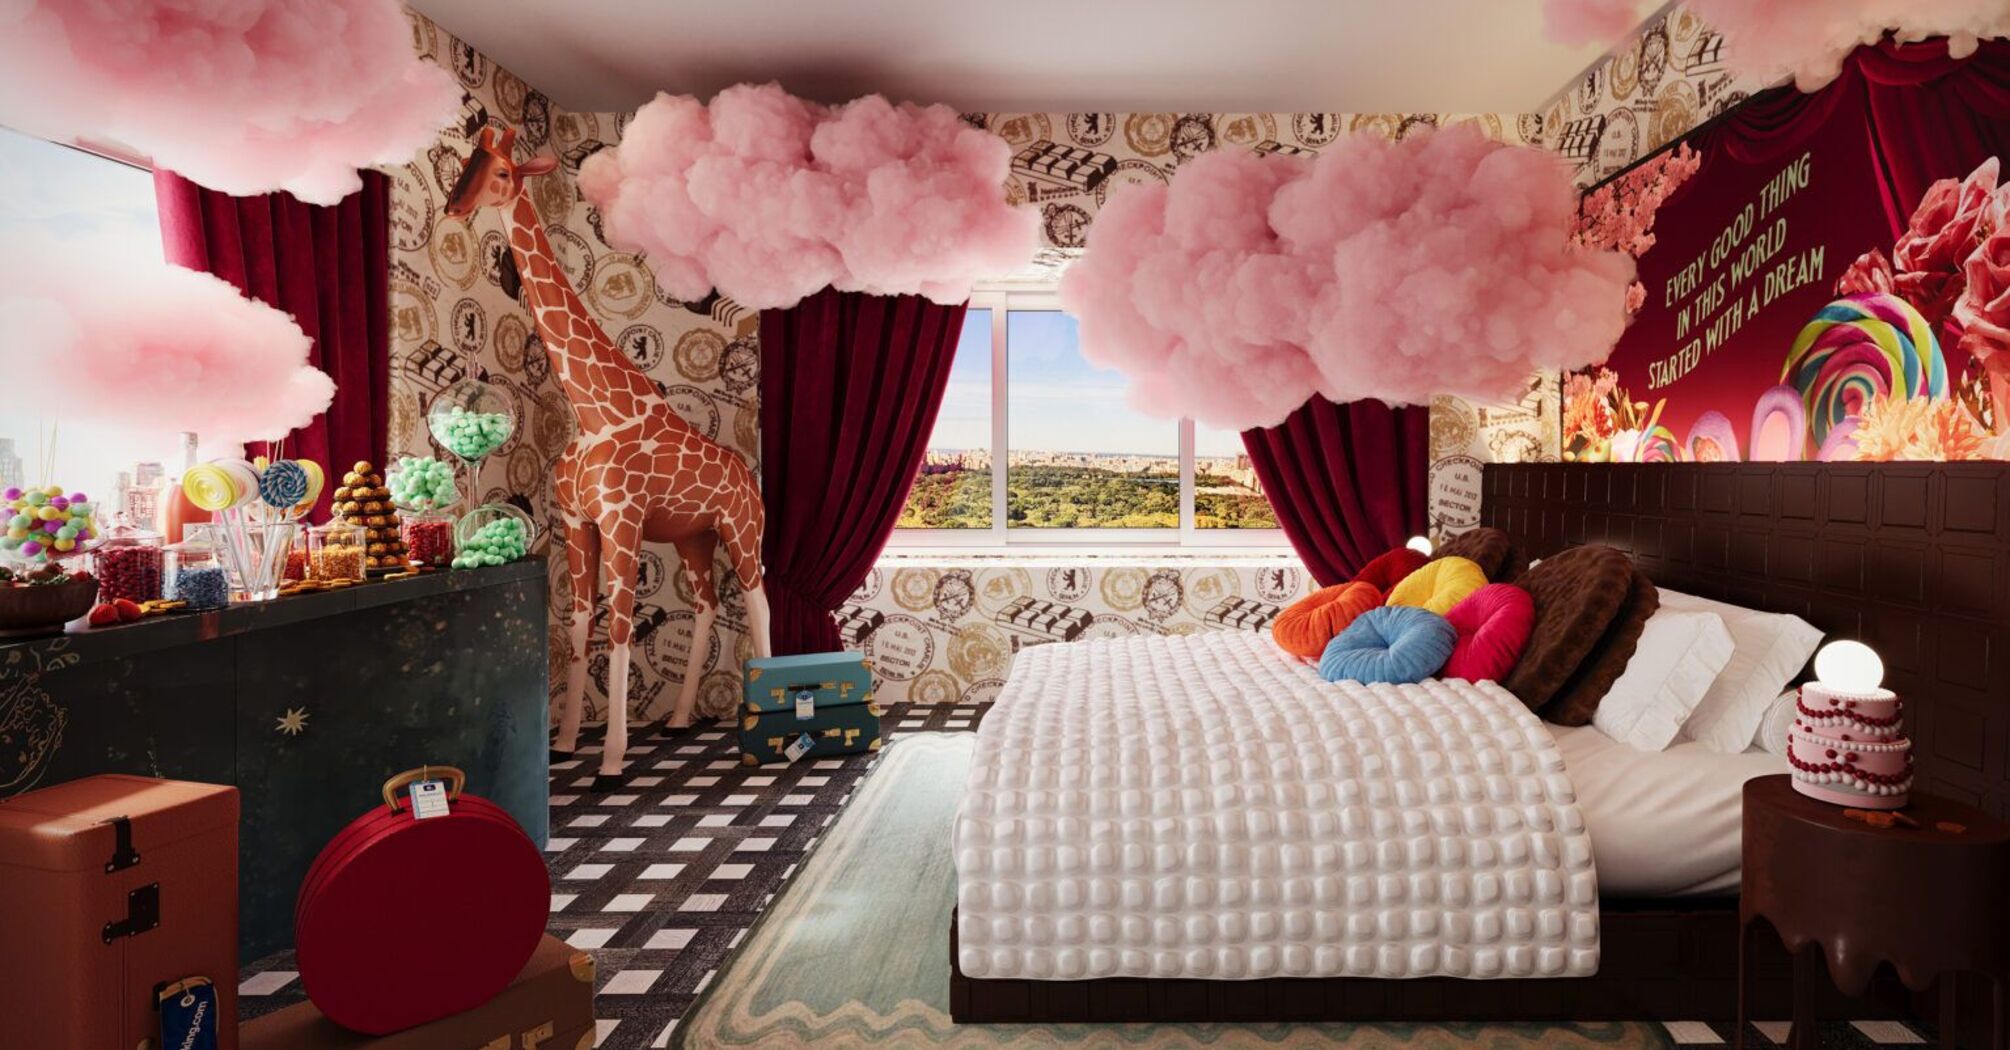 Hotel rooms in the style of Willy Wonka in New York: what they look like